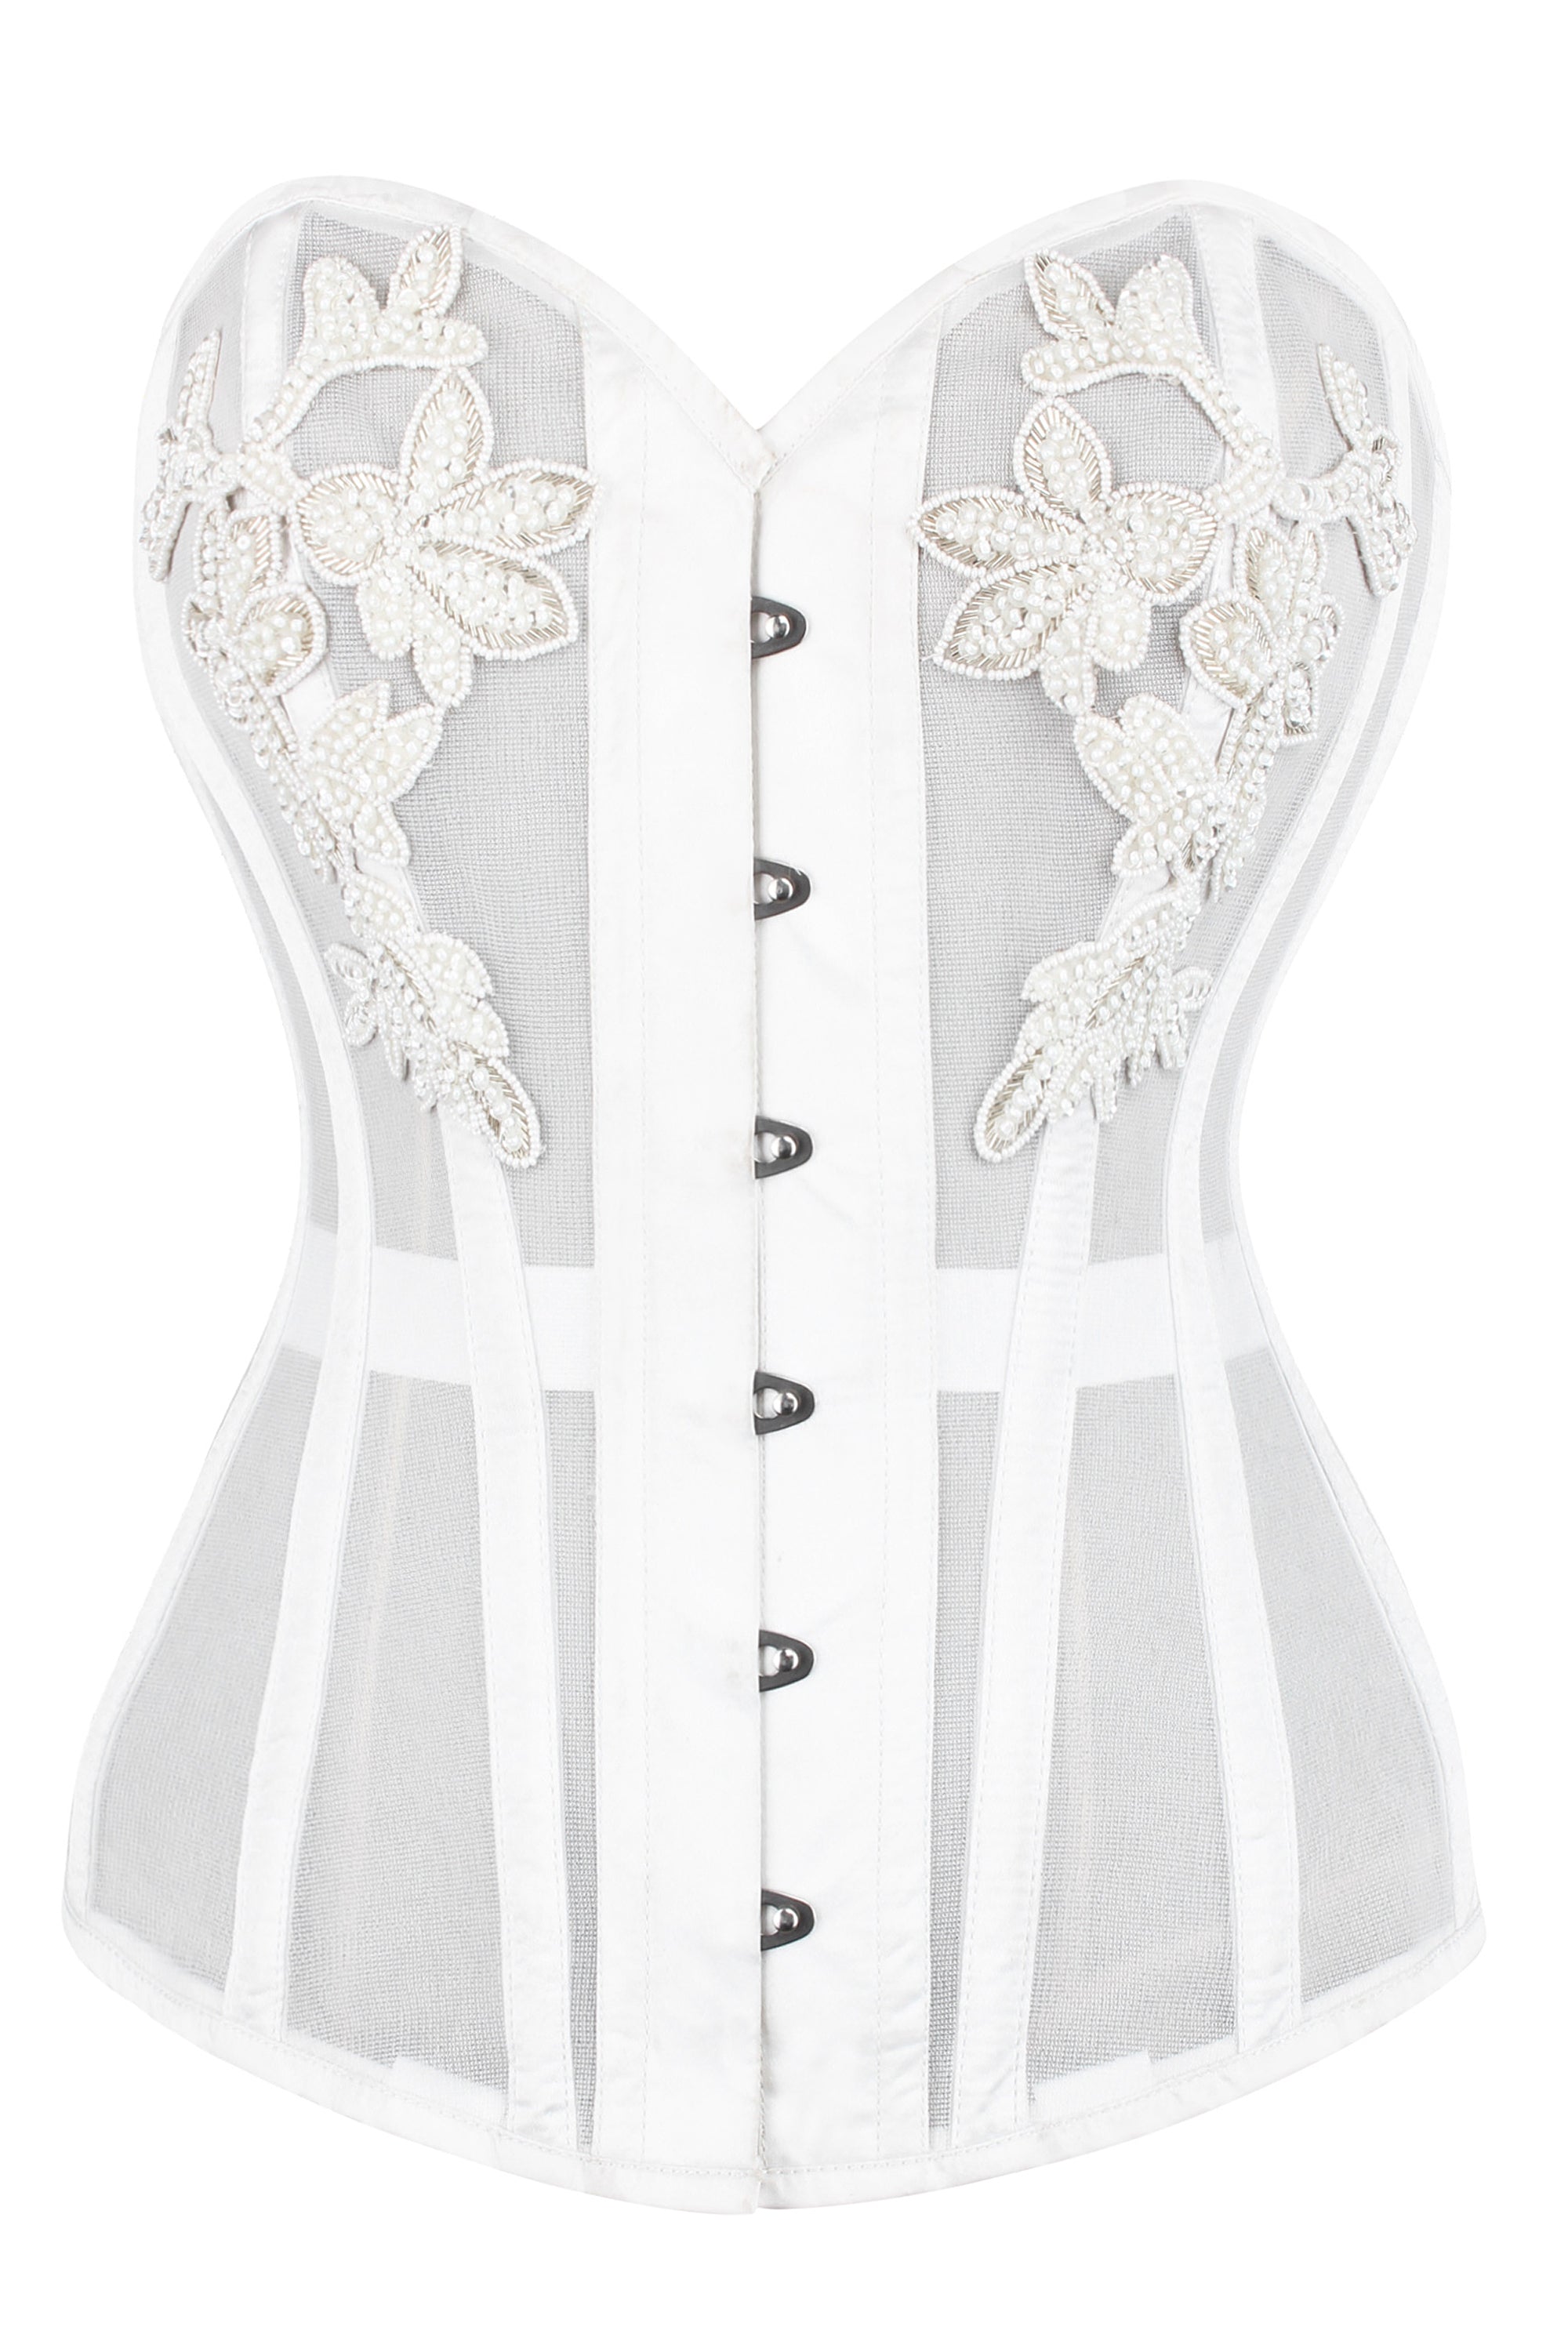 White Mesh with Lace Overlay Custom Made Bridal Corset (ELC-701)